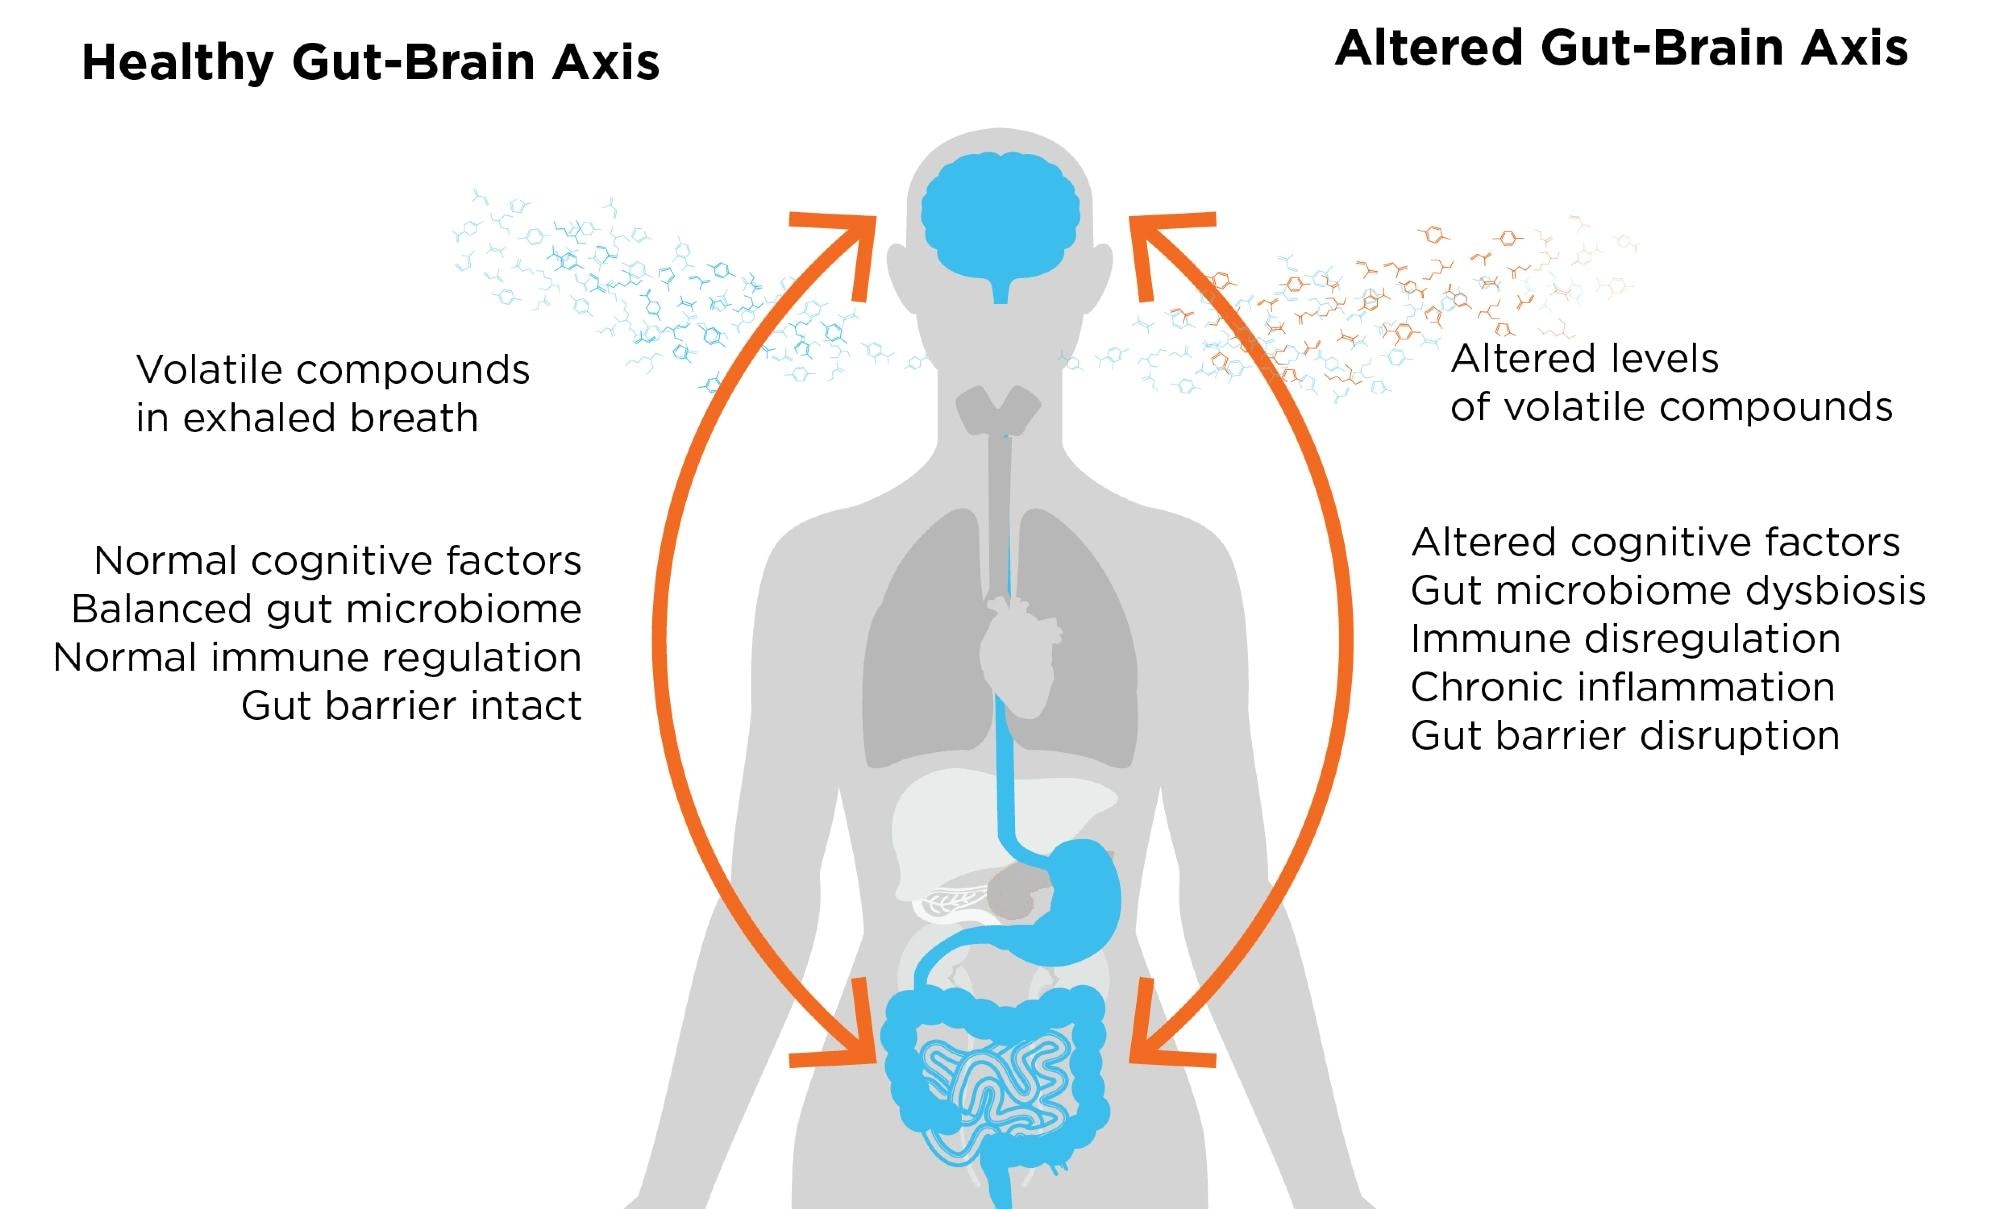 Discovering the gut-brain axis with breath analysis